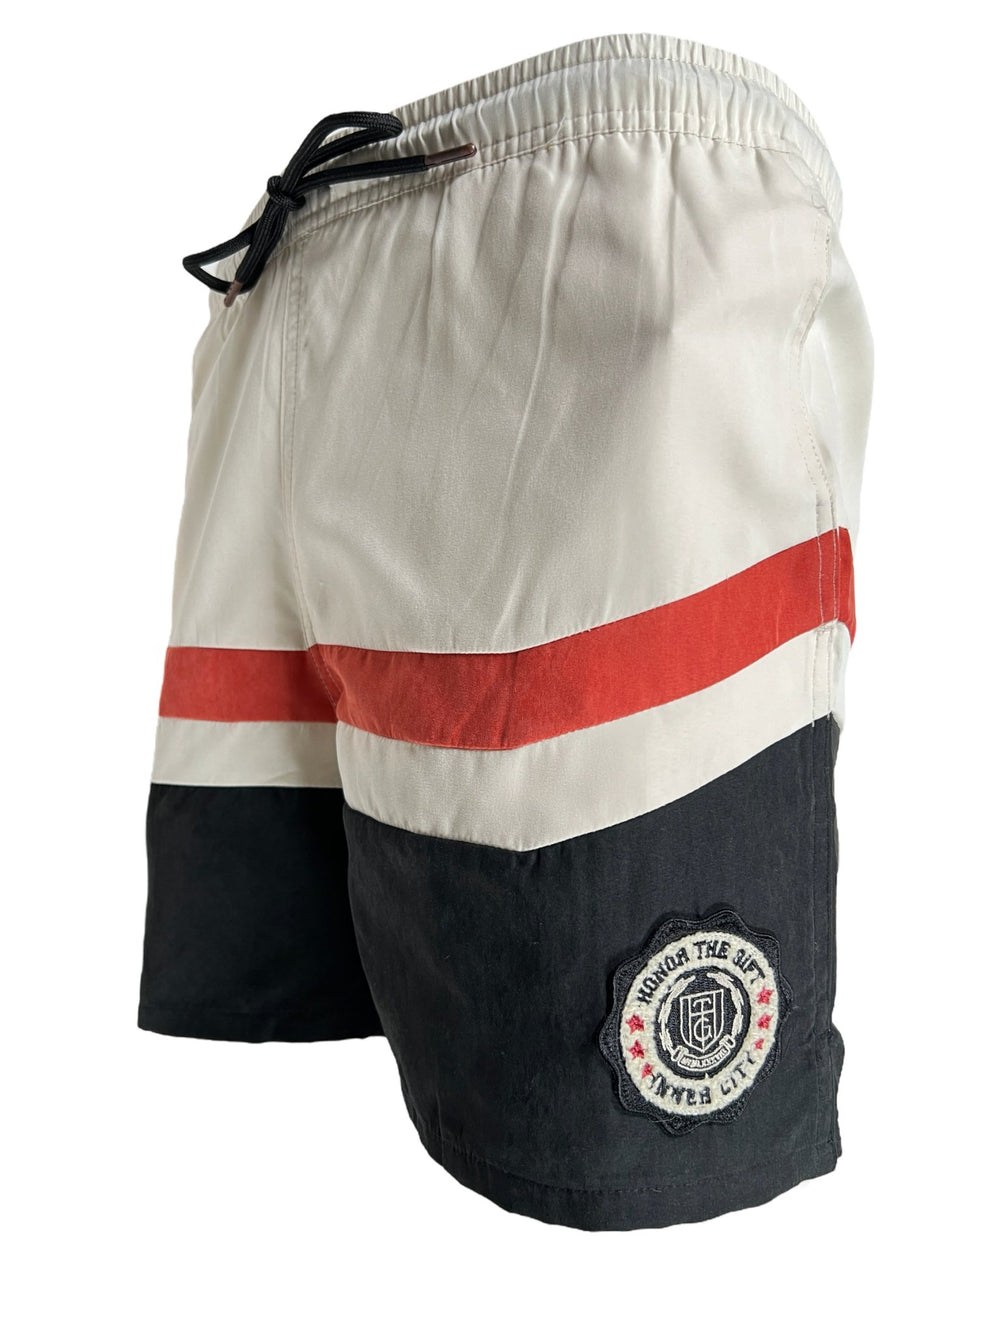 Athletic shorts with a colorblocked white, red, and black scheme, featuring an embroidered logo on the left leg from HONOR THE GIFT A-SPRING BRUSHED POLY TRACK SHORT BLACK.